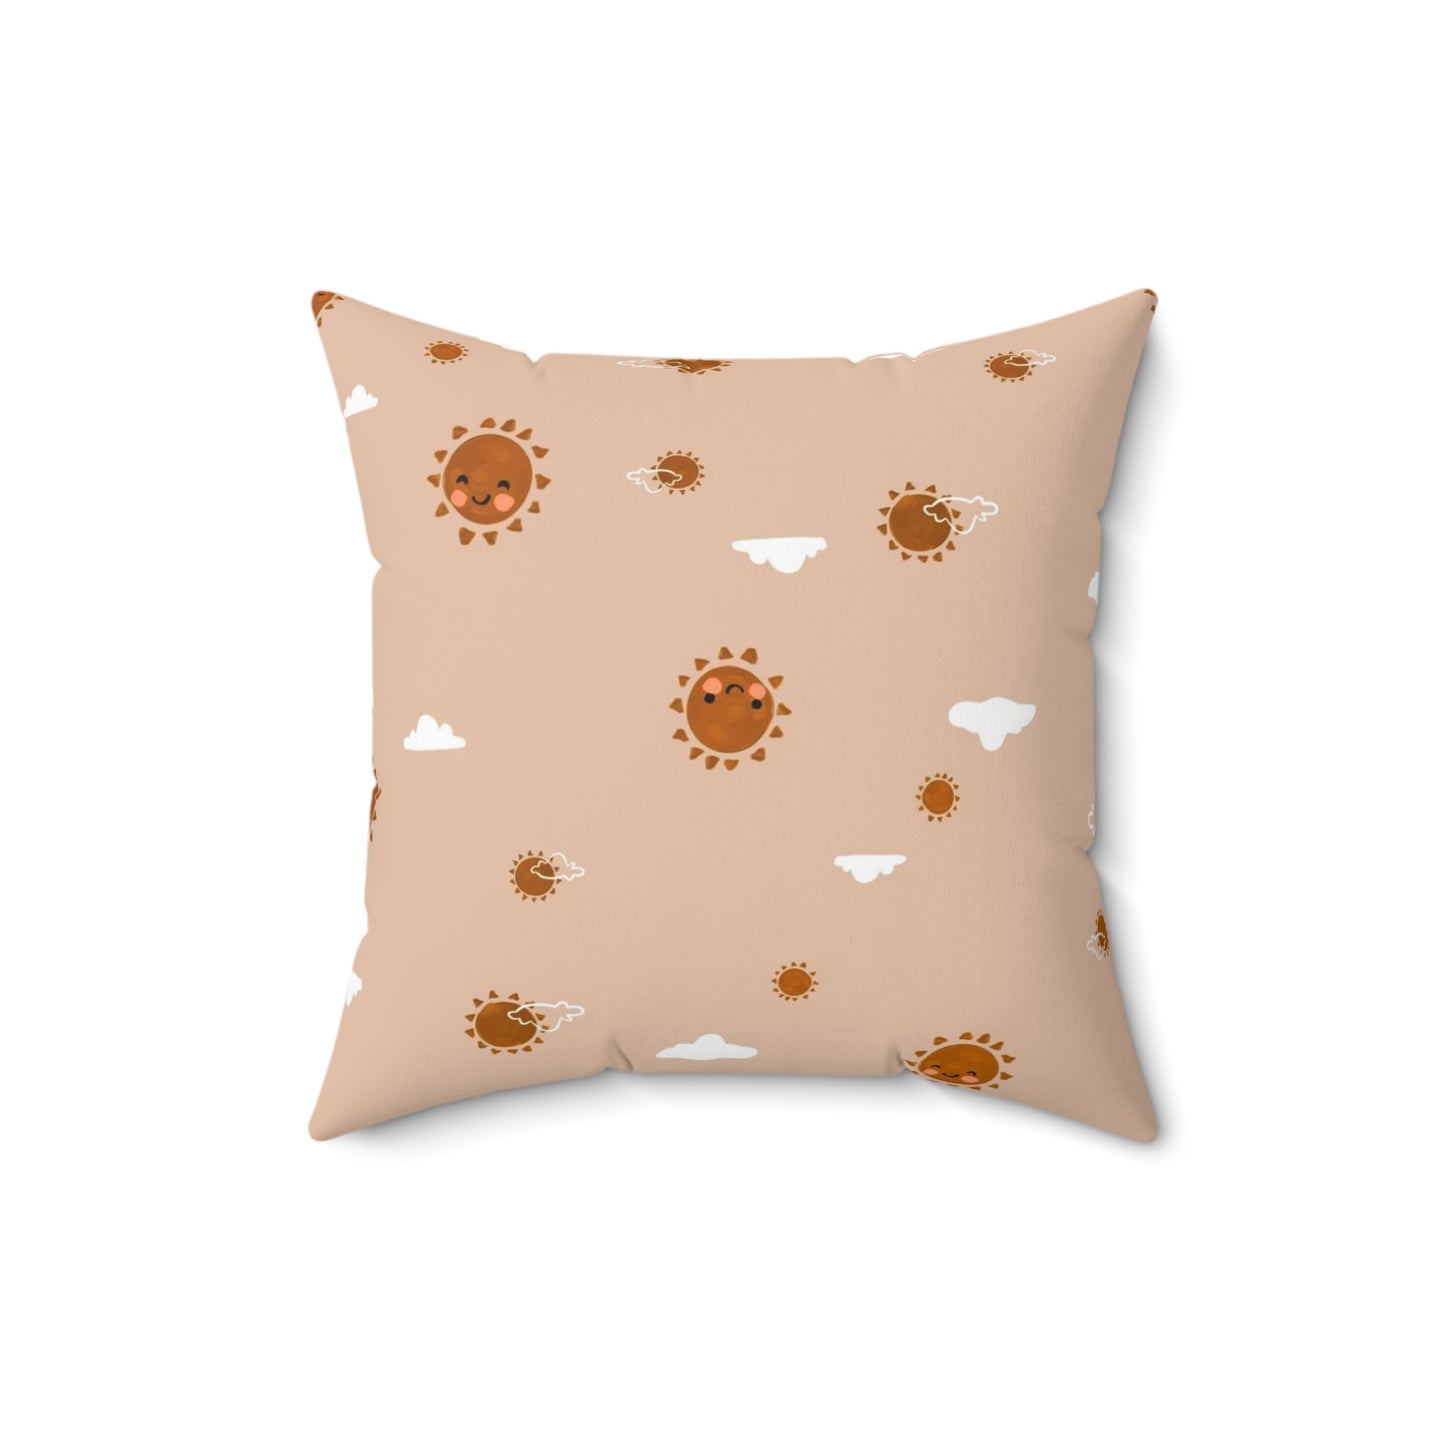 Sunny Days Square Pillow